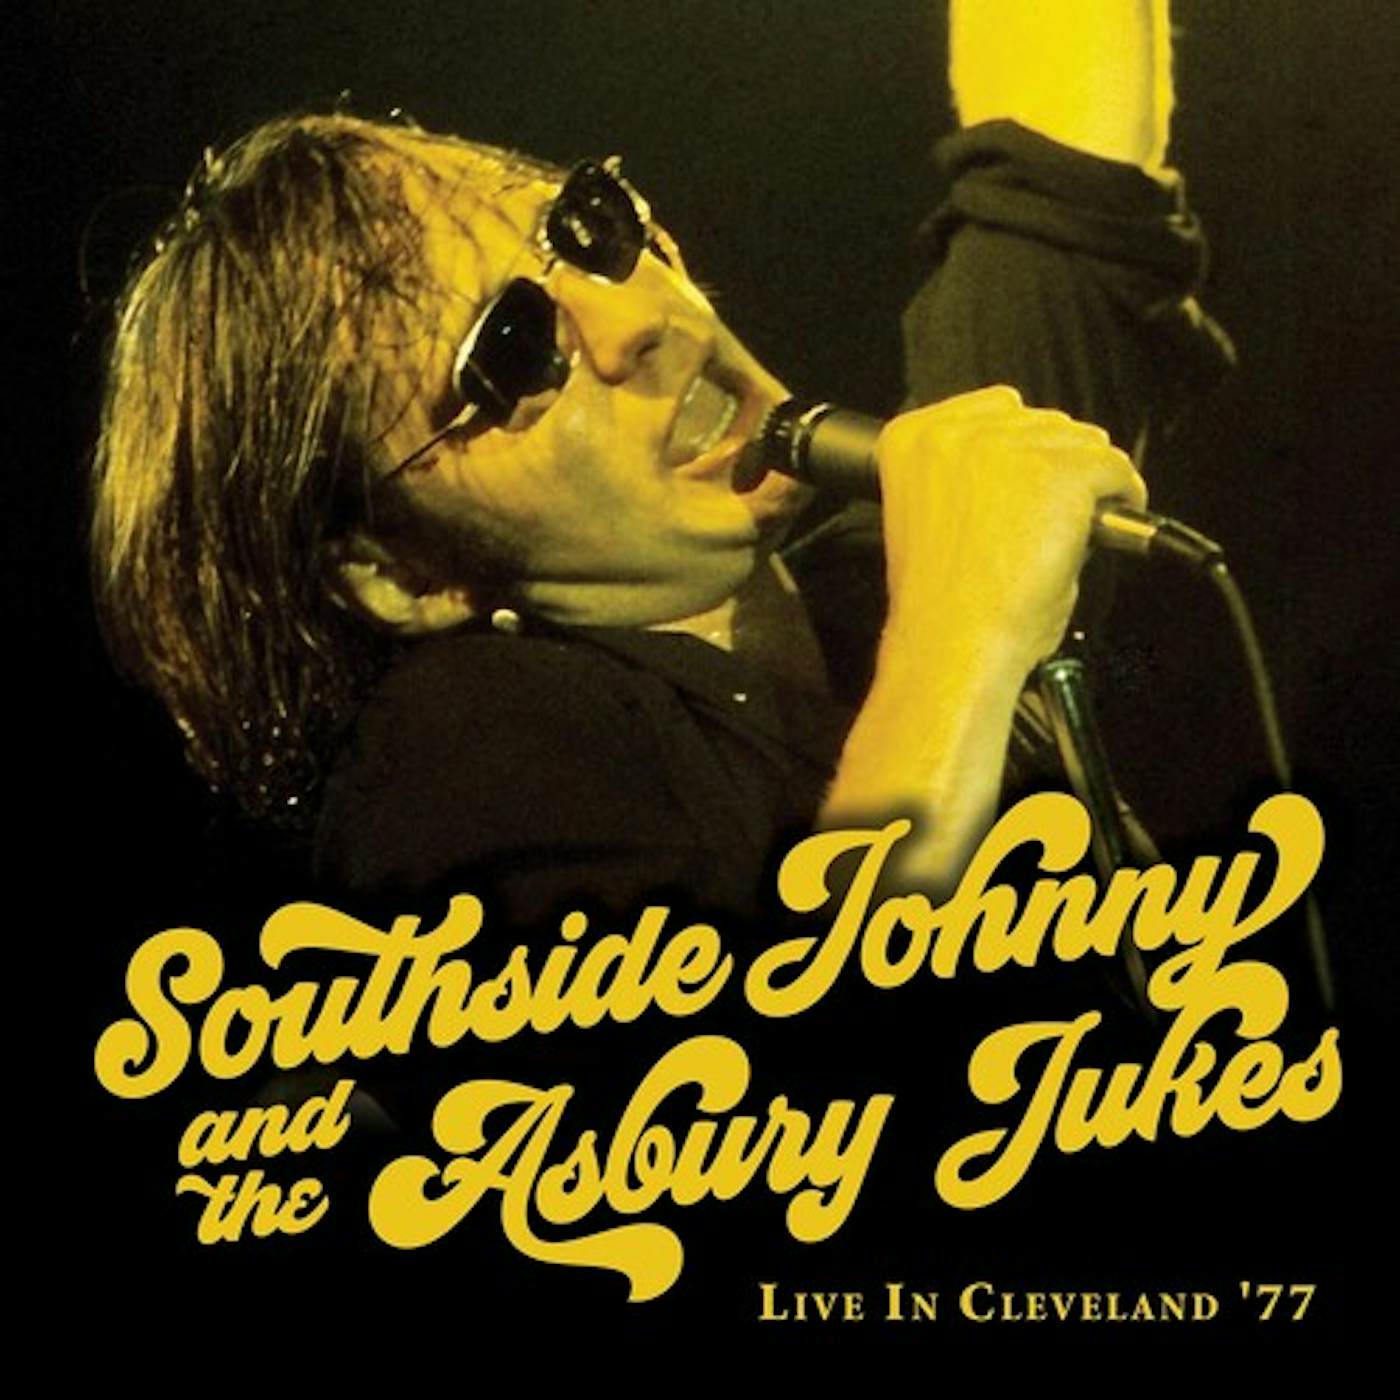 Southside Johnny And The Asbury Jukes LIVE IN CLEVELAND '77 CD